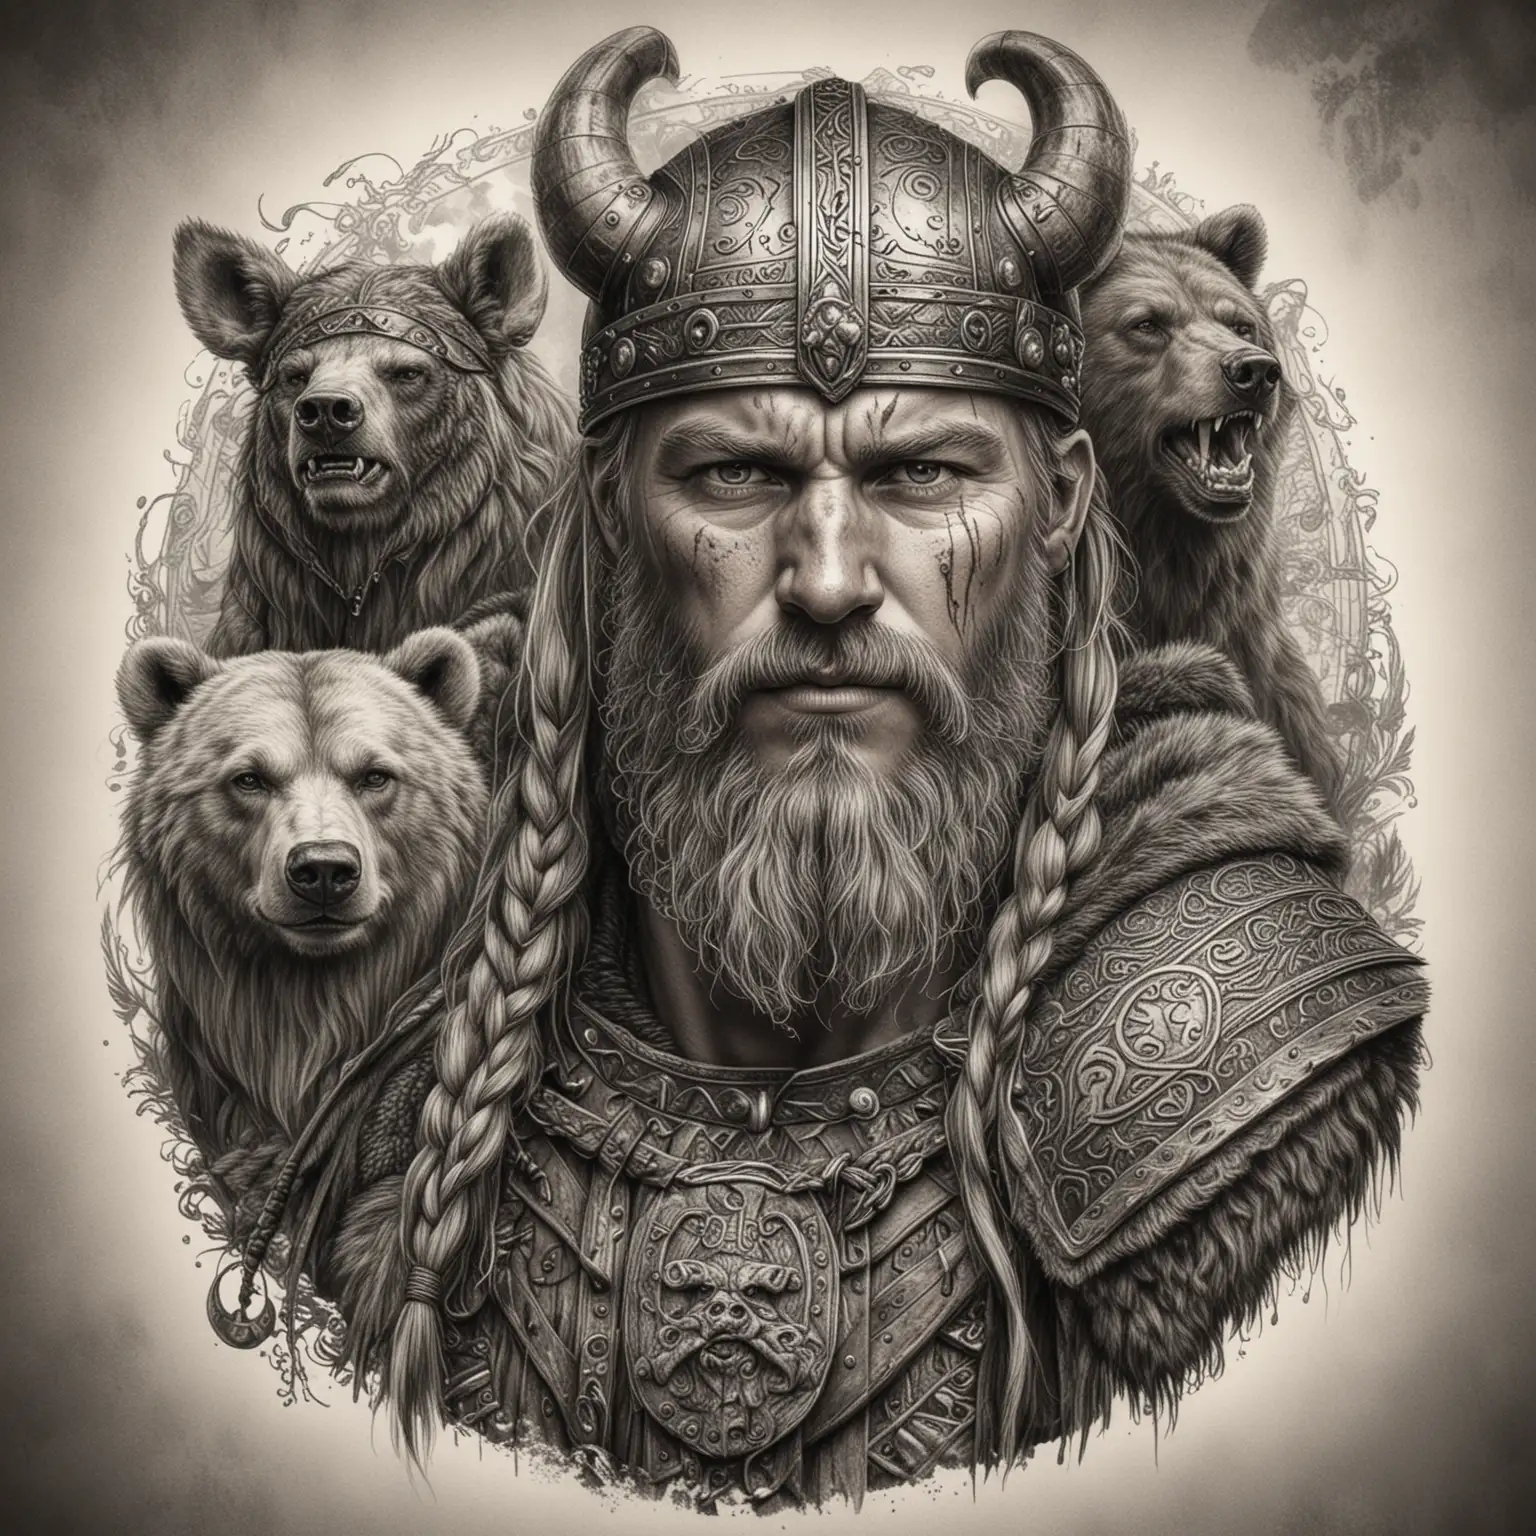 Realistic-Viking-with-Bear-Drawing-in-Detailed-Pencil-Graphic-Style